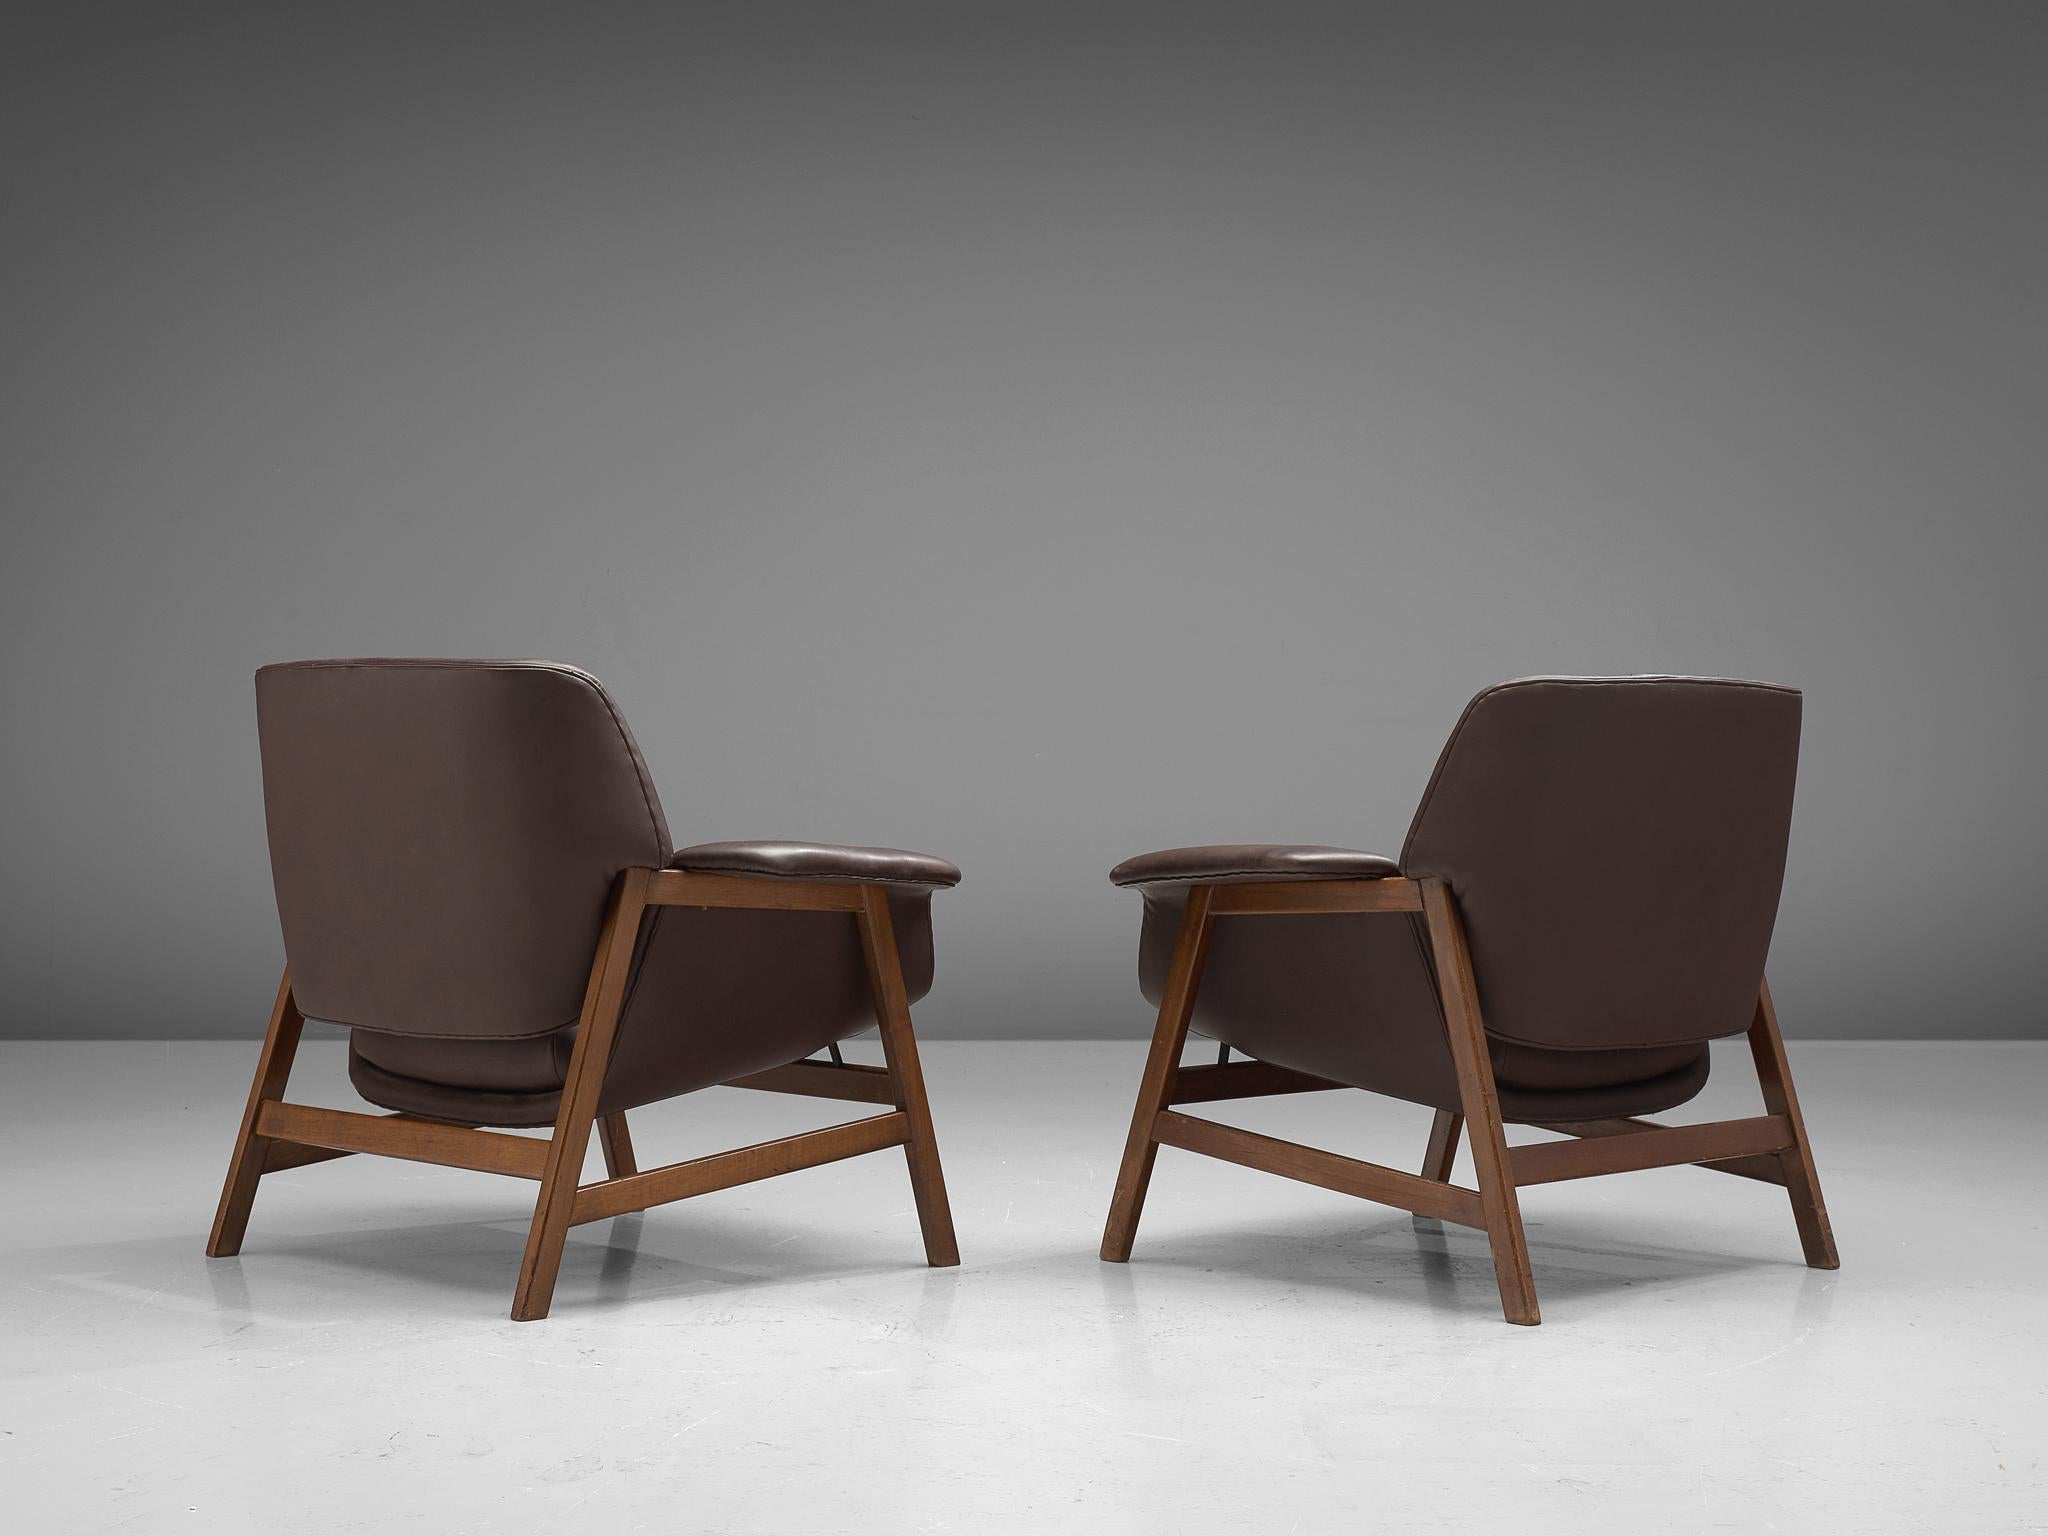 Mid-20th Century Gianfranco Frattini for Cassina Pair of Lounge chairs '849' in Walnut